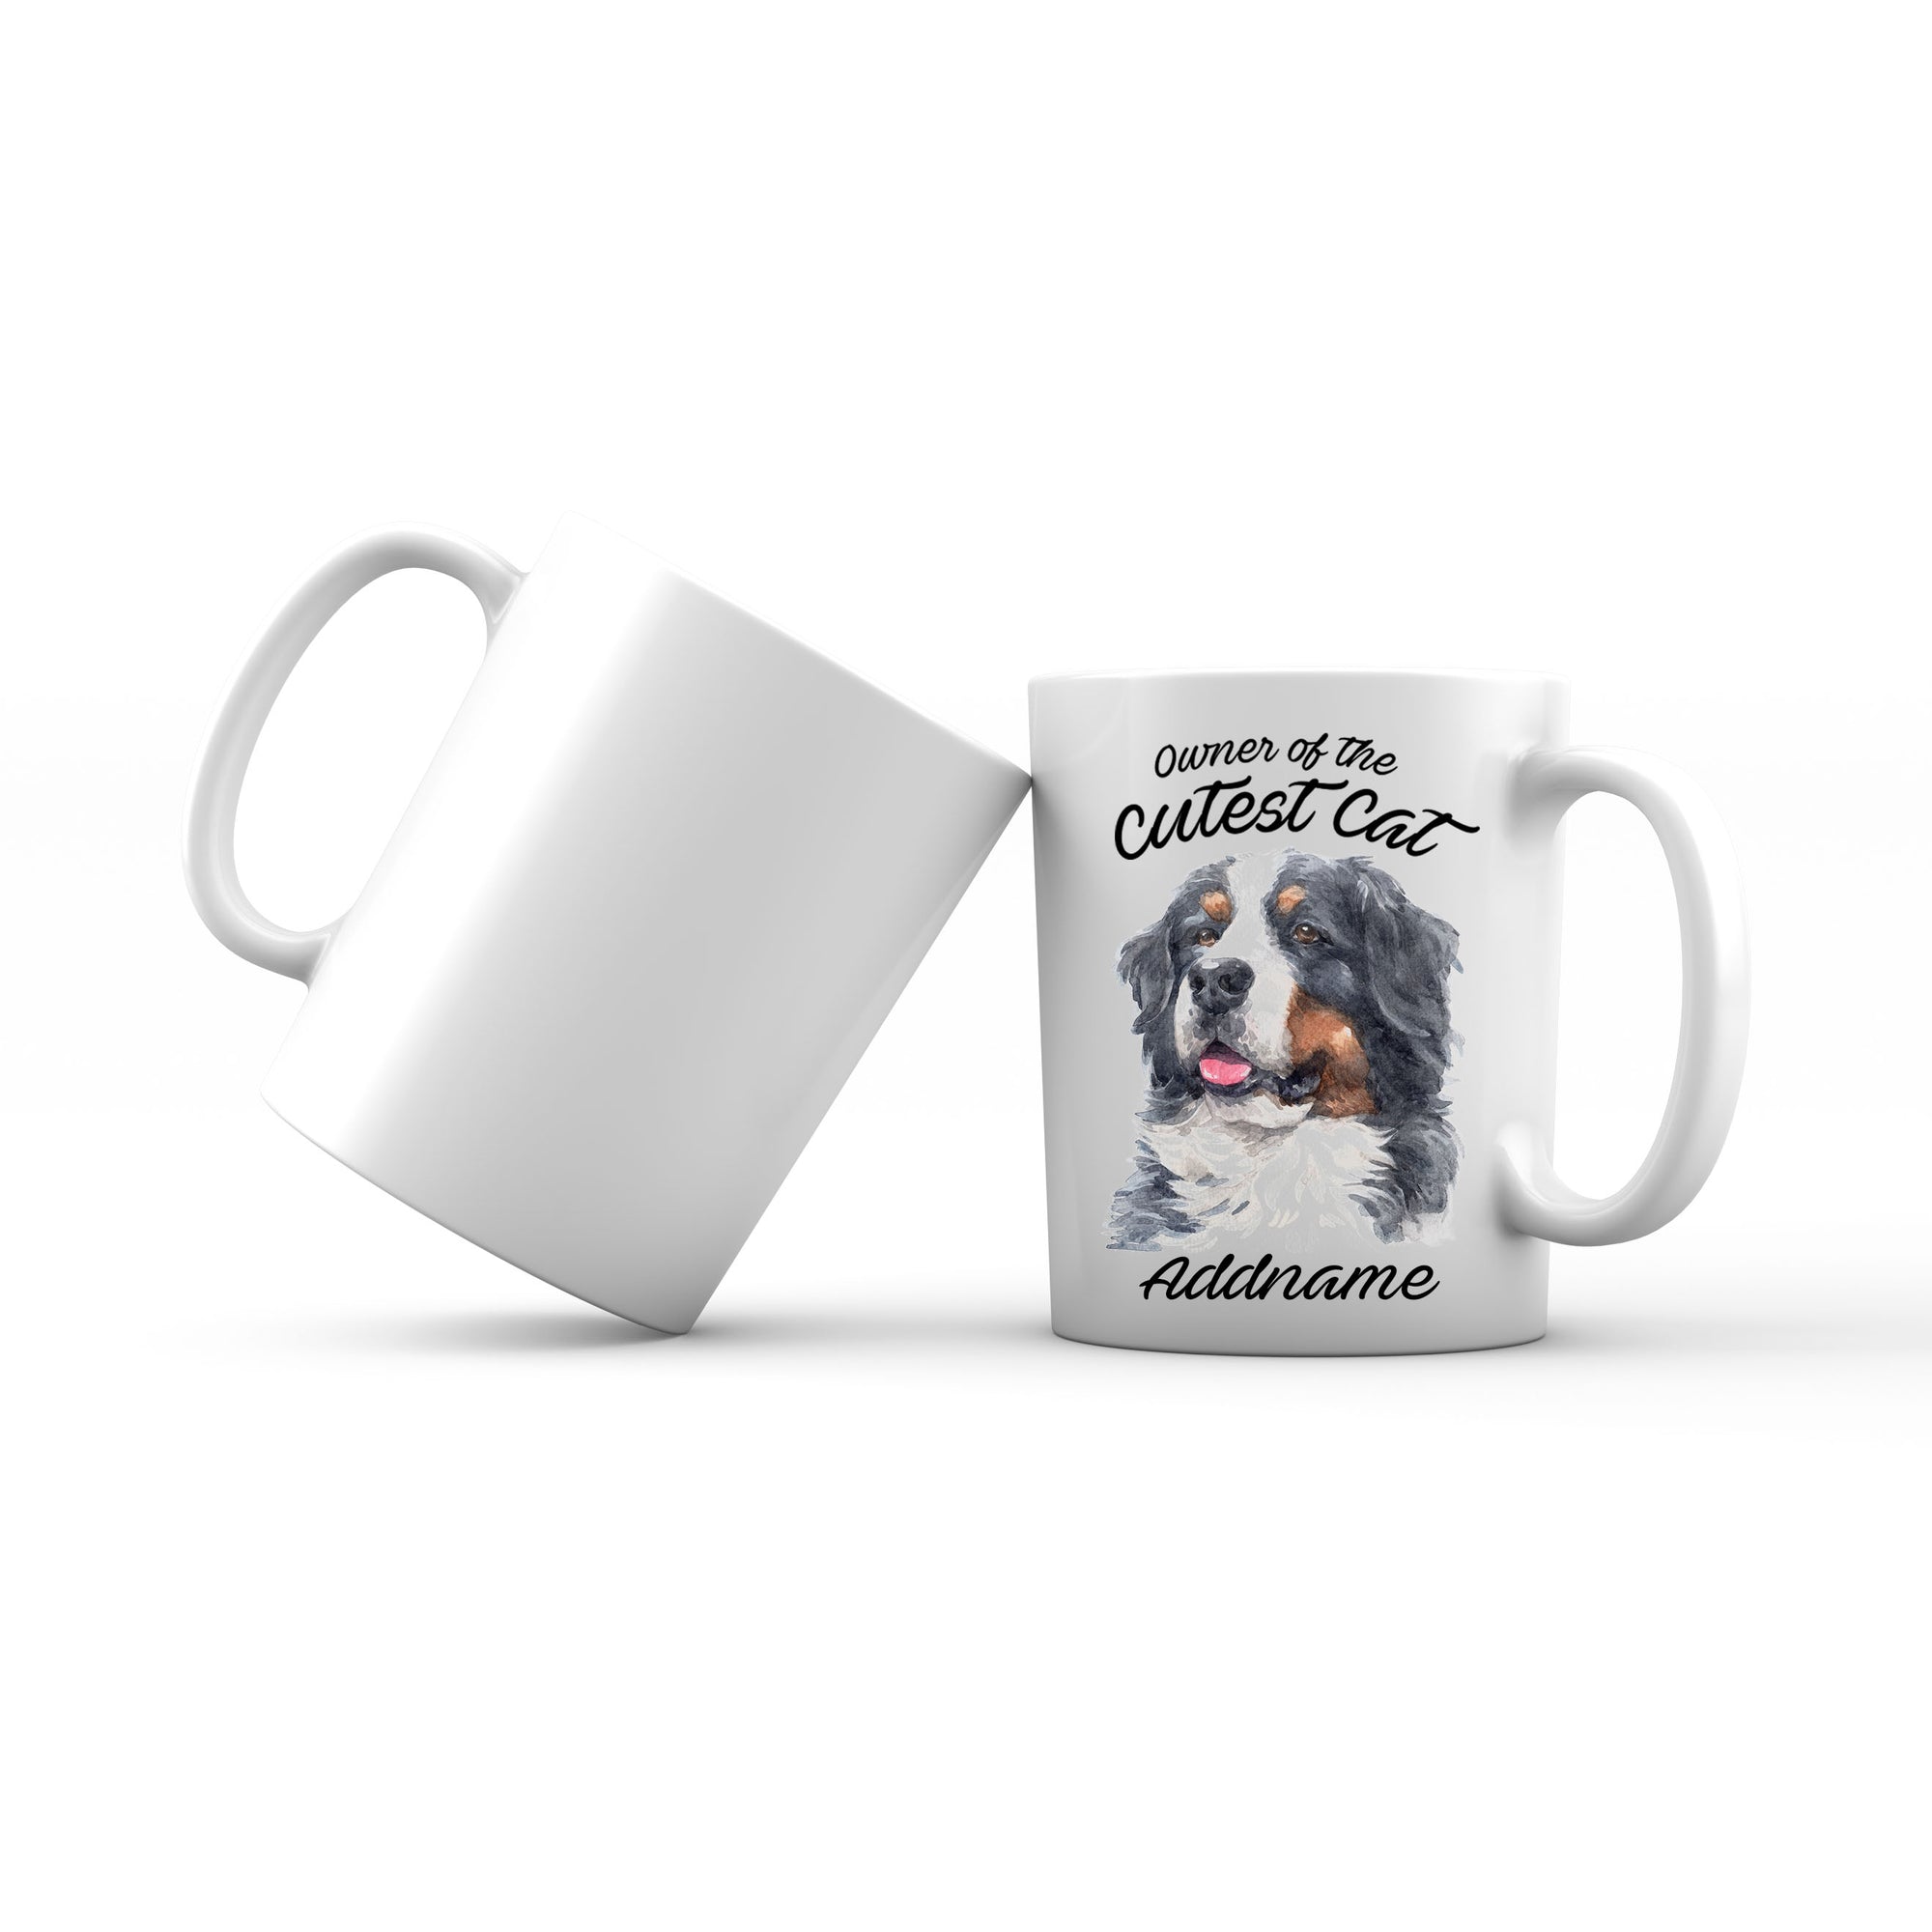 Watercolor Dog Owner Of The Cutest Dog Bernese Mountain Dog Addname Mug